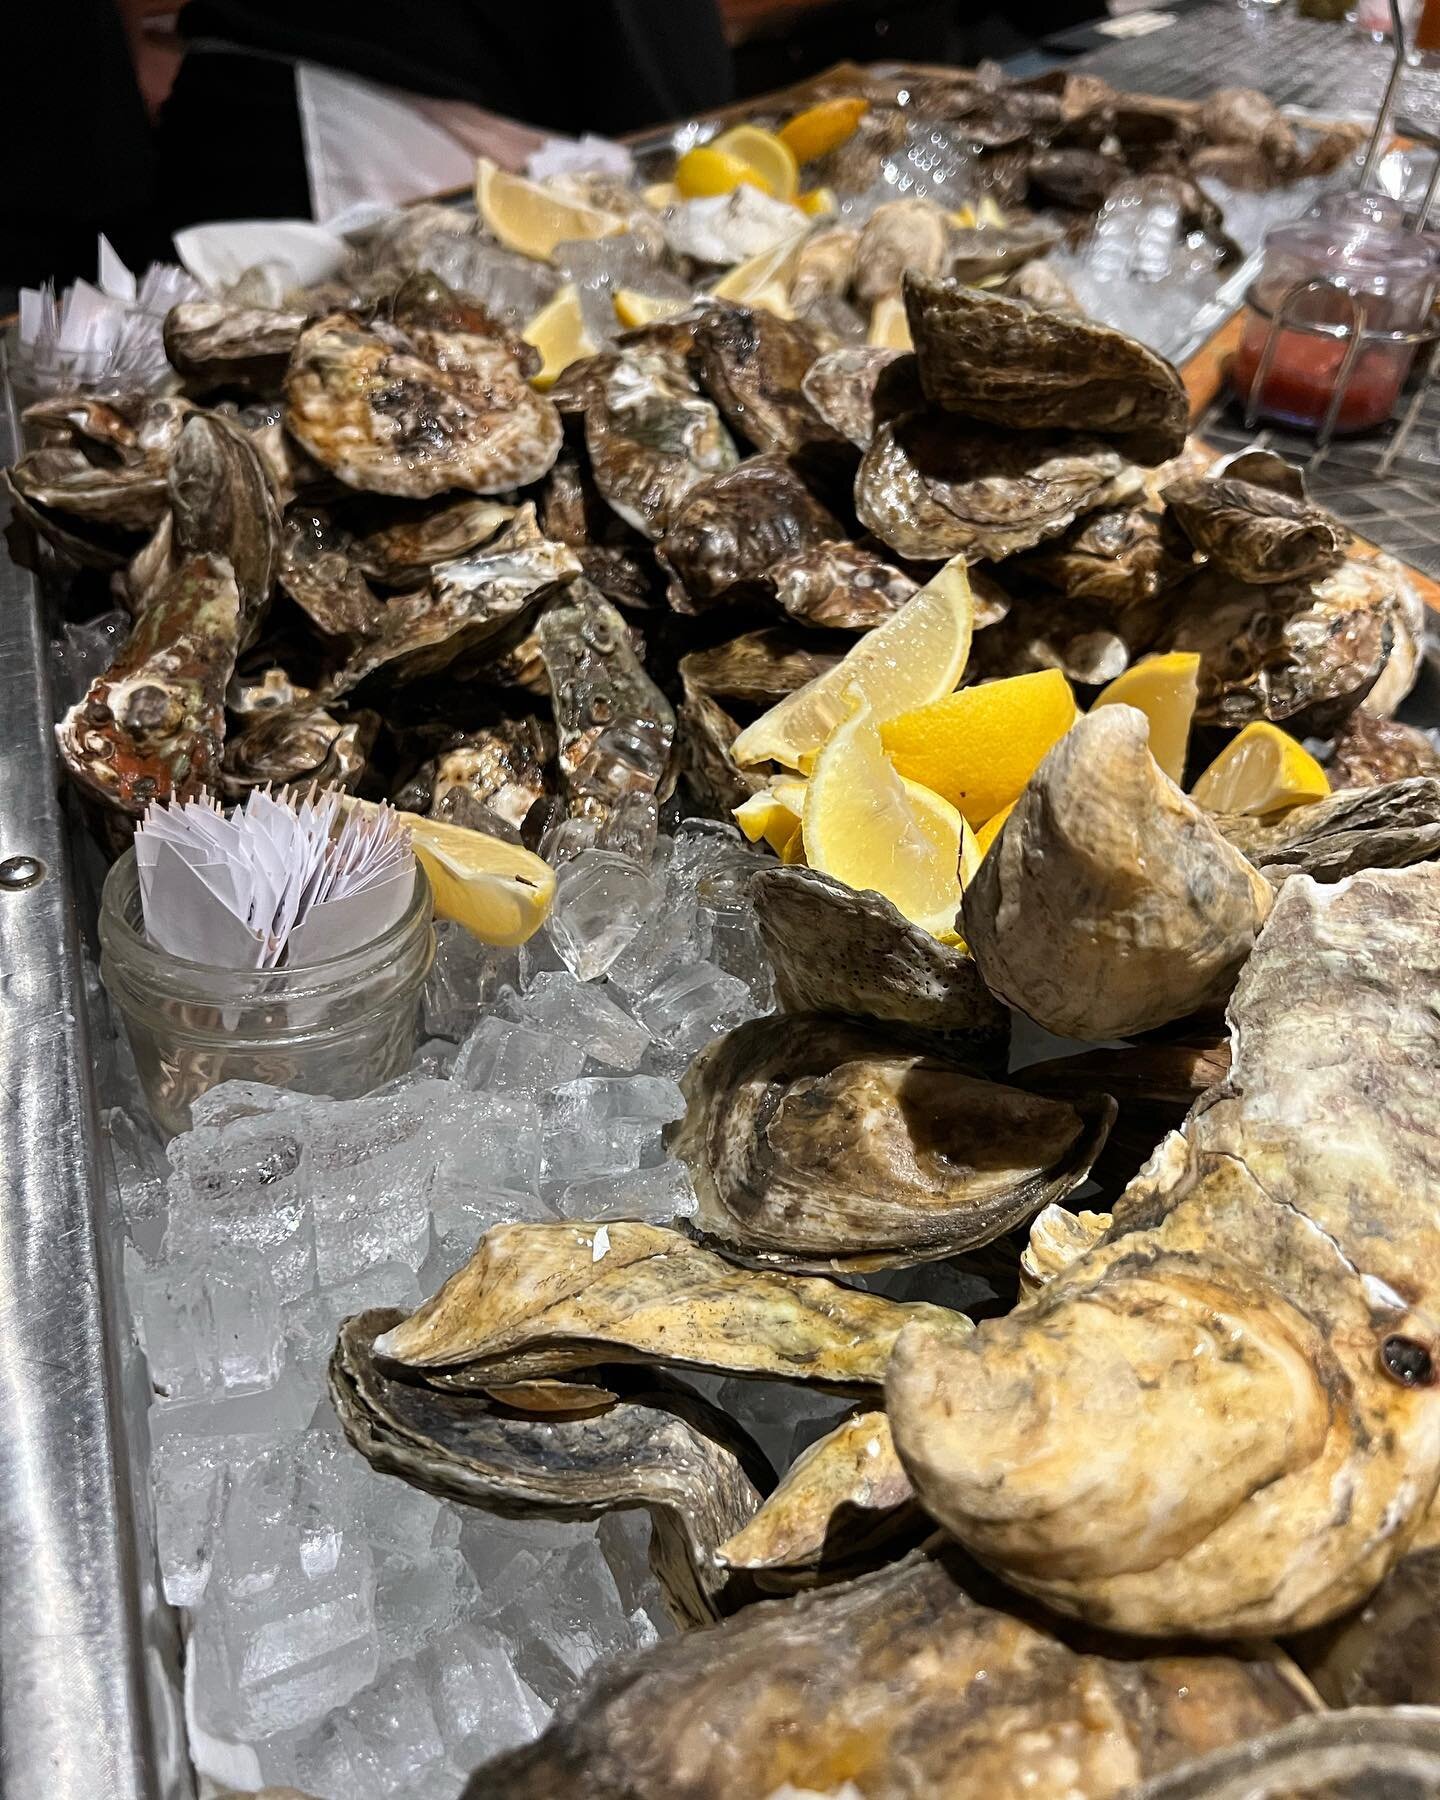 2 dollar oysters tonight! We will not be doing our normal 1 dollar oysters this coming Tuesday for Valentine&rsquo;s Day so make sure you come out for your fix tonight! We also have 7 dollar select cocktails and no corkage fee all night long.